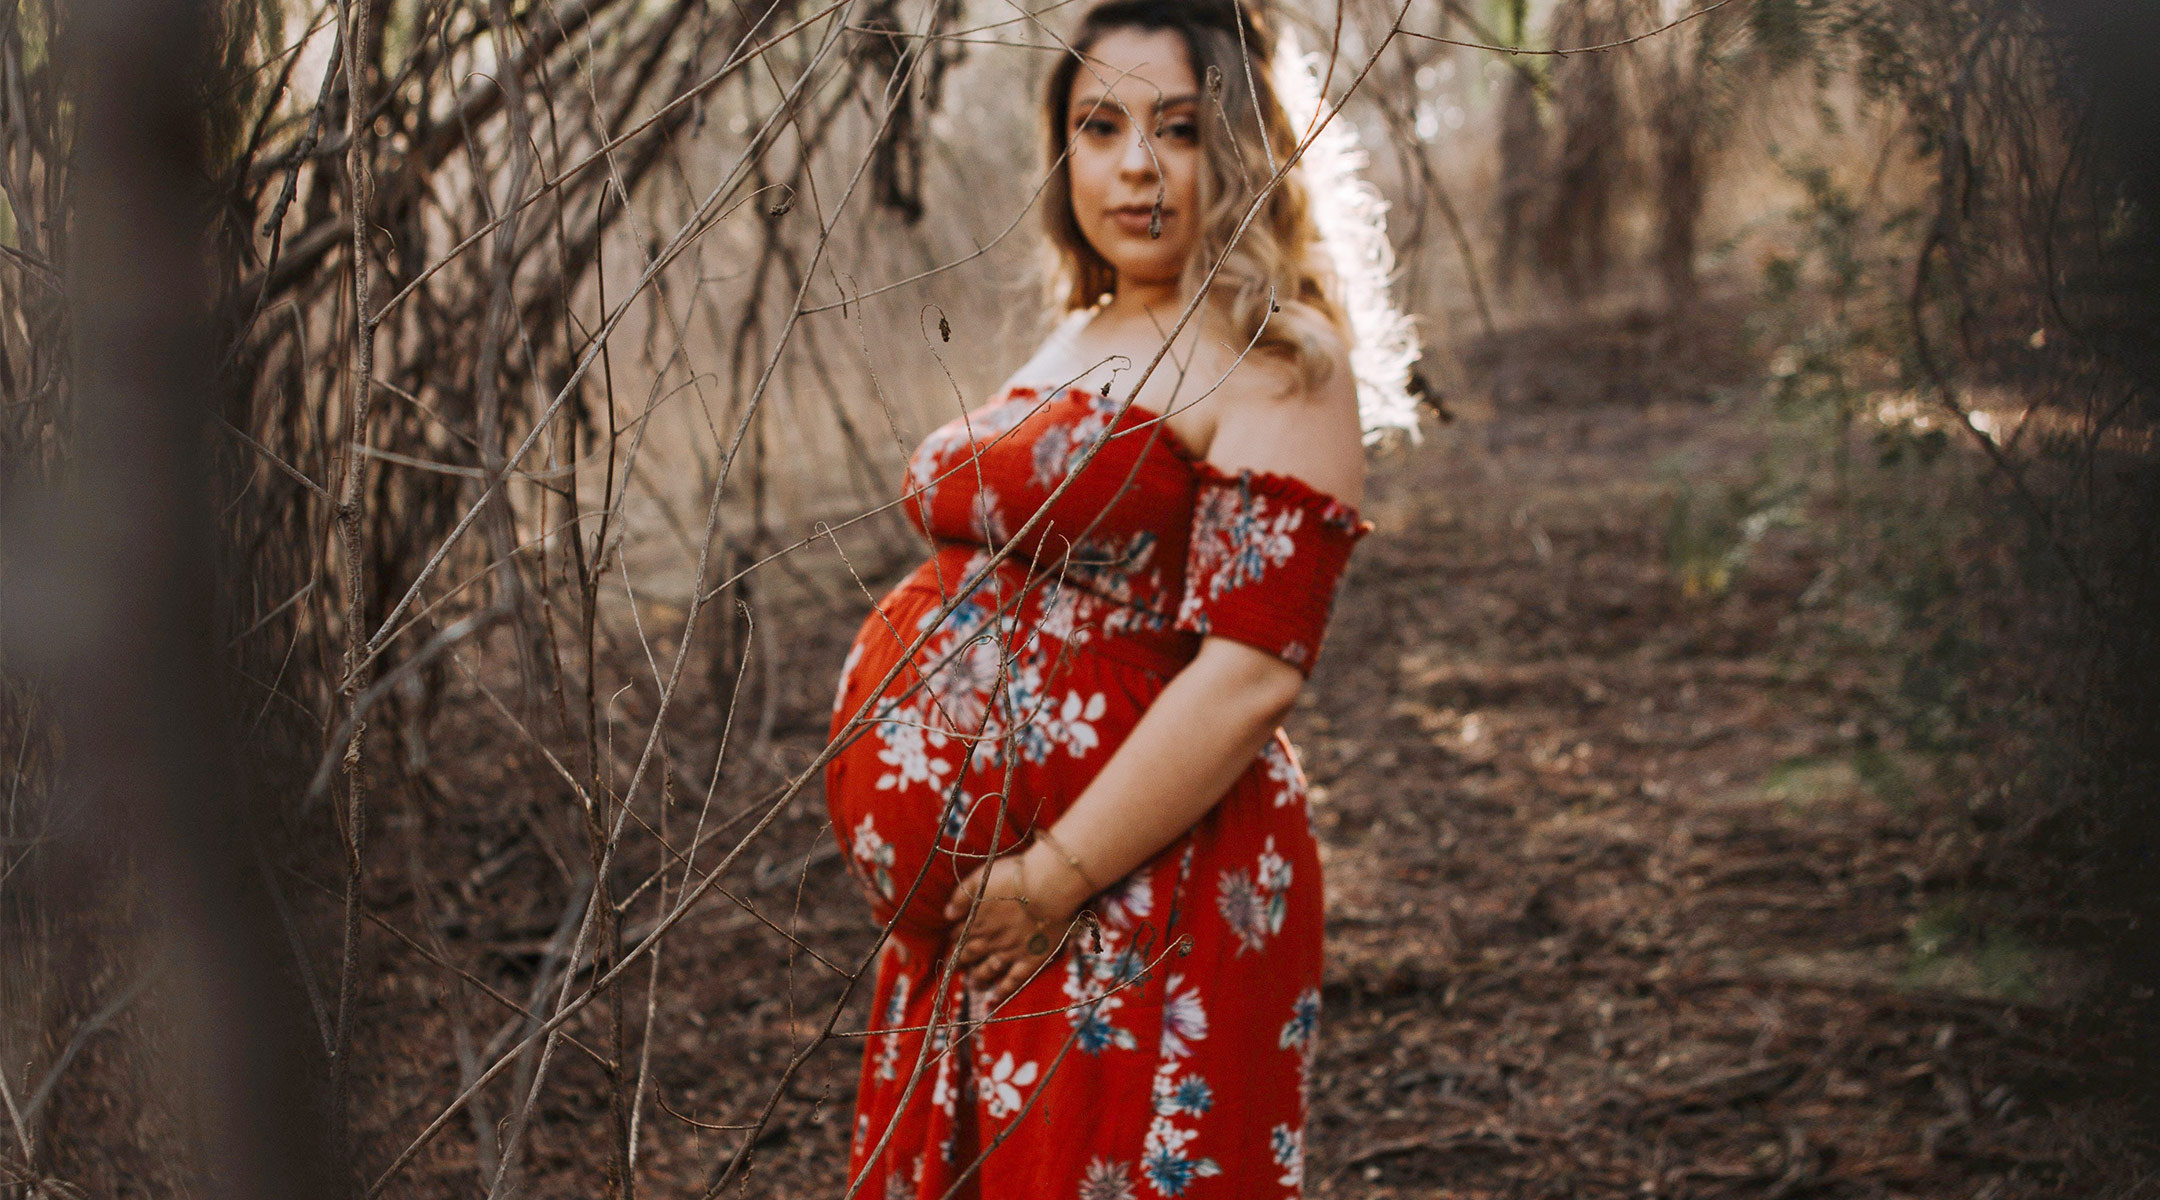 pregnant woman in nature backdrop wearing long floral dress